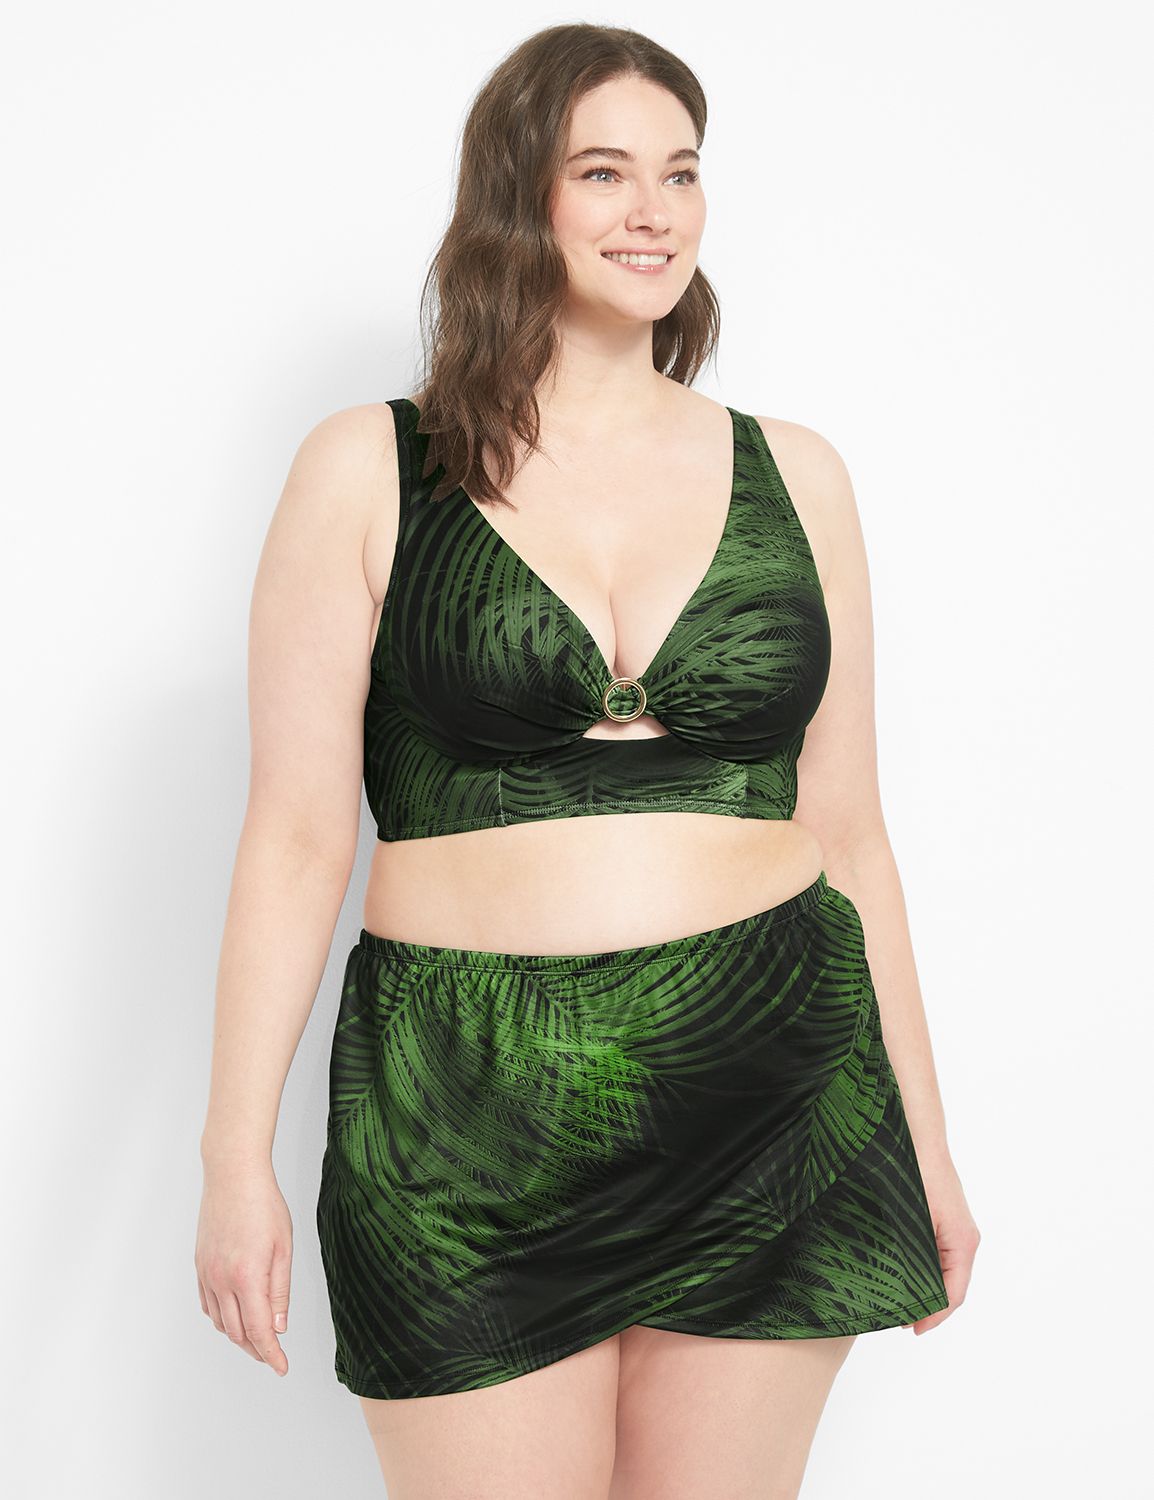 Lane Bryant - New Cacique swim that's as sexy as it is comfortable. And  that's just the cherry on top. Head to Cacique for more.  #ForTheLoveofCurves Shop Swim